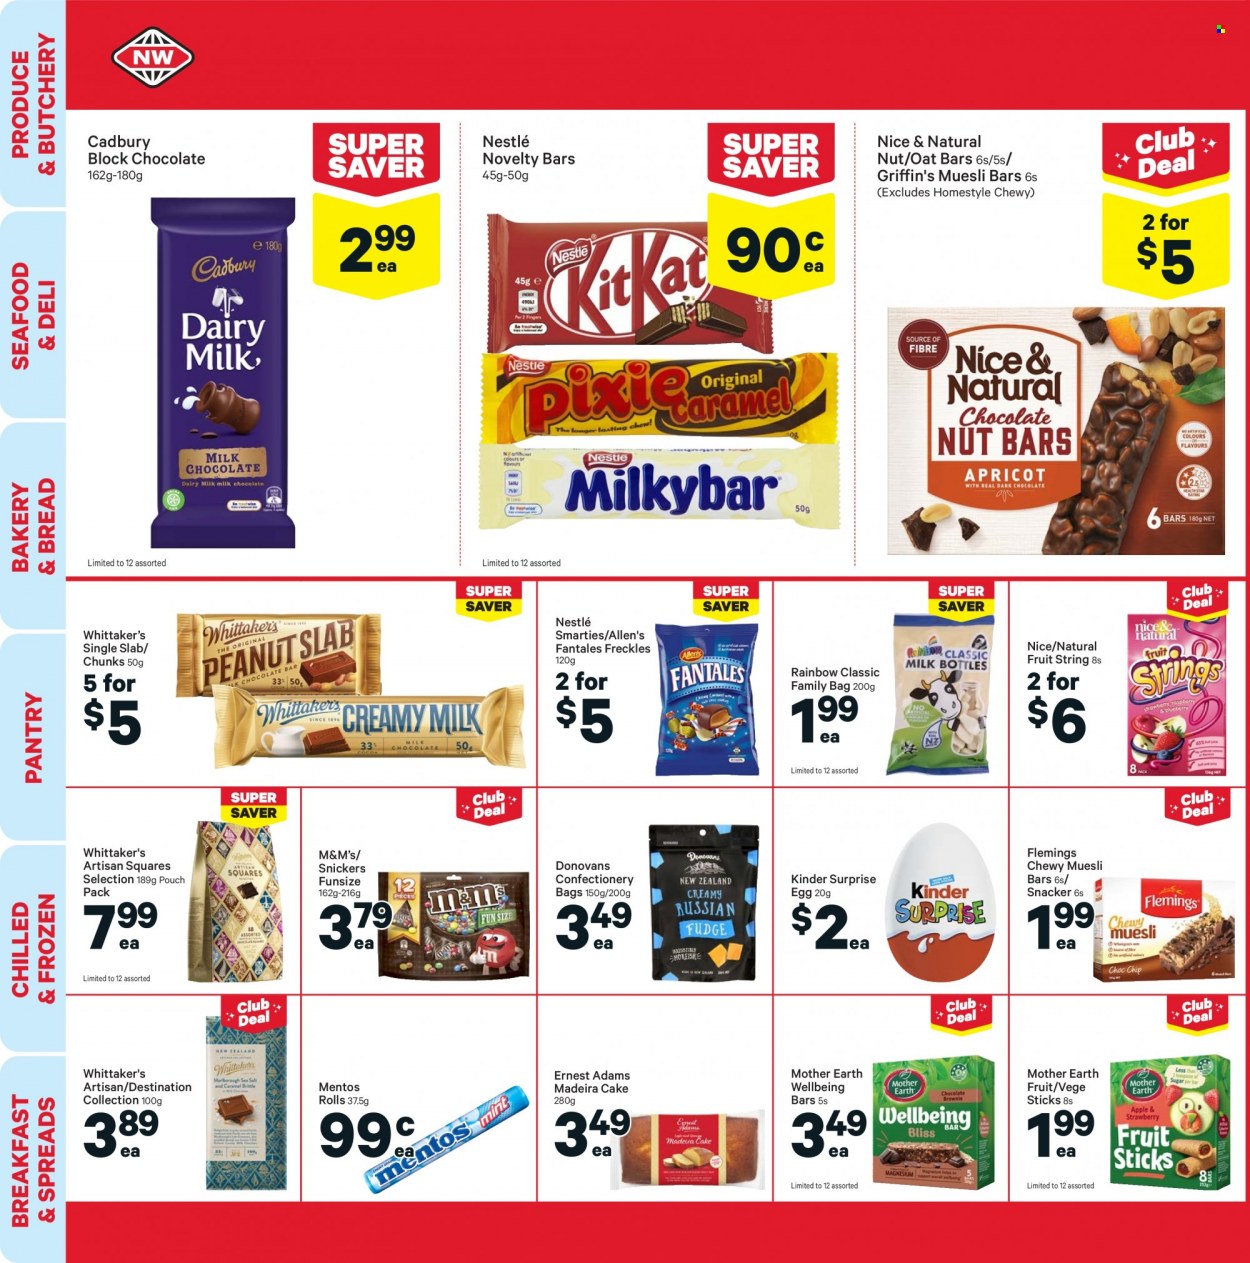 thumbnail - New World mailer - 11.10.2021 - 17.10.2021 - Sales products - bread, cake, madeira cake, seafood, eggs, Nestlé, chocolate, Mentos, Snickers, M&M's, Smarties, Kinder Surprise, Cadbury, Griffin's, Mother Earth, Whittaker's, Artisan Squares Selection, Donovans, muesli bar, muesli. Page 20.